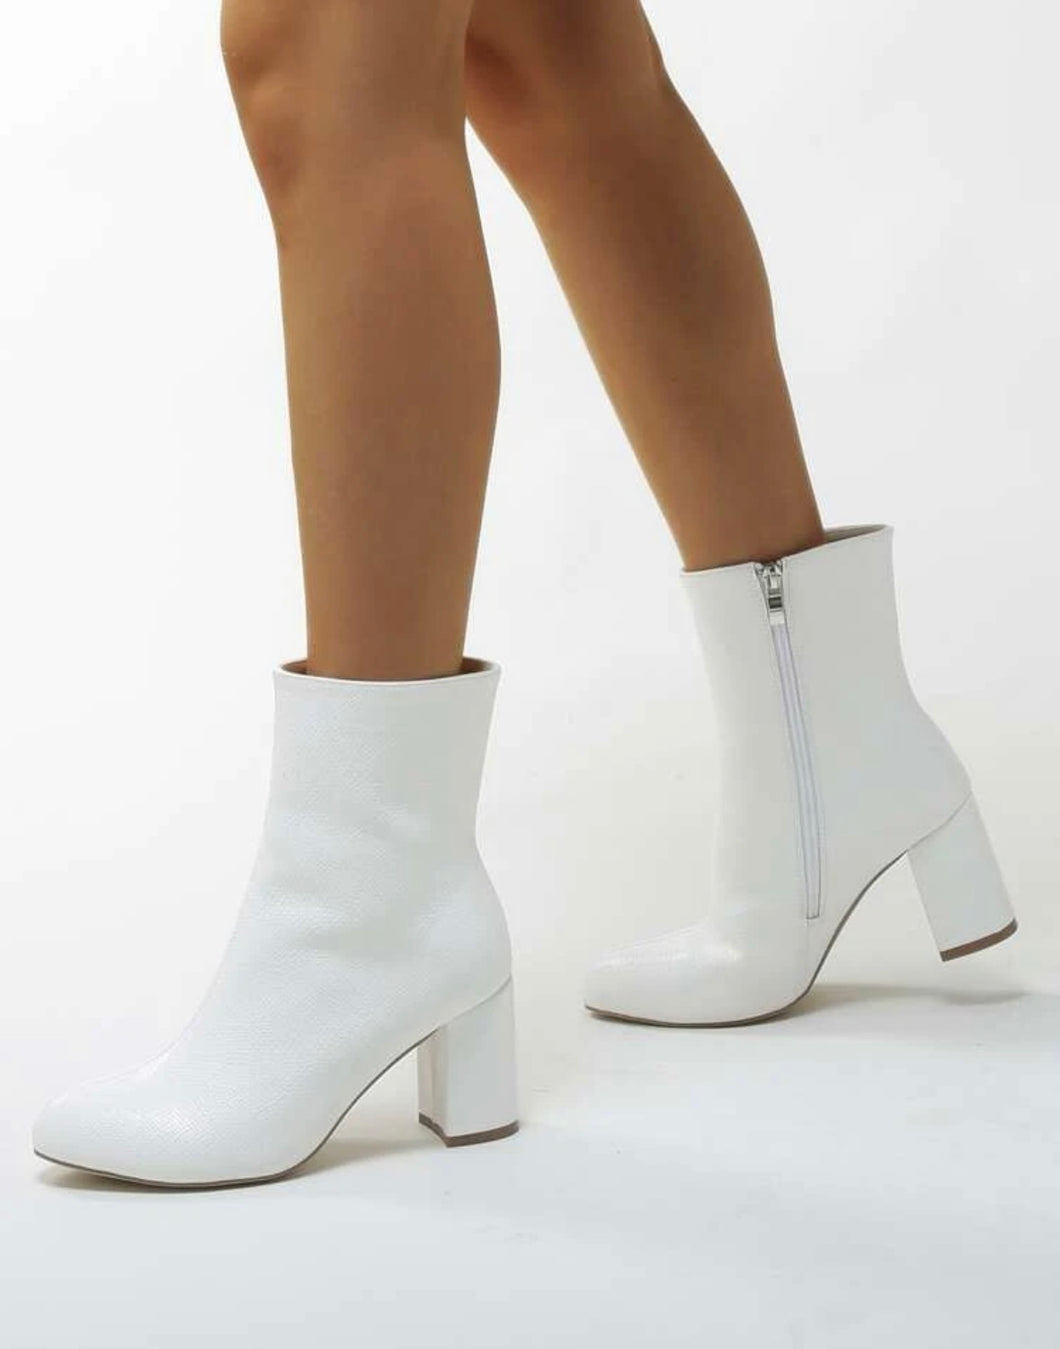 White Leather Ankle Booties - Juniper